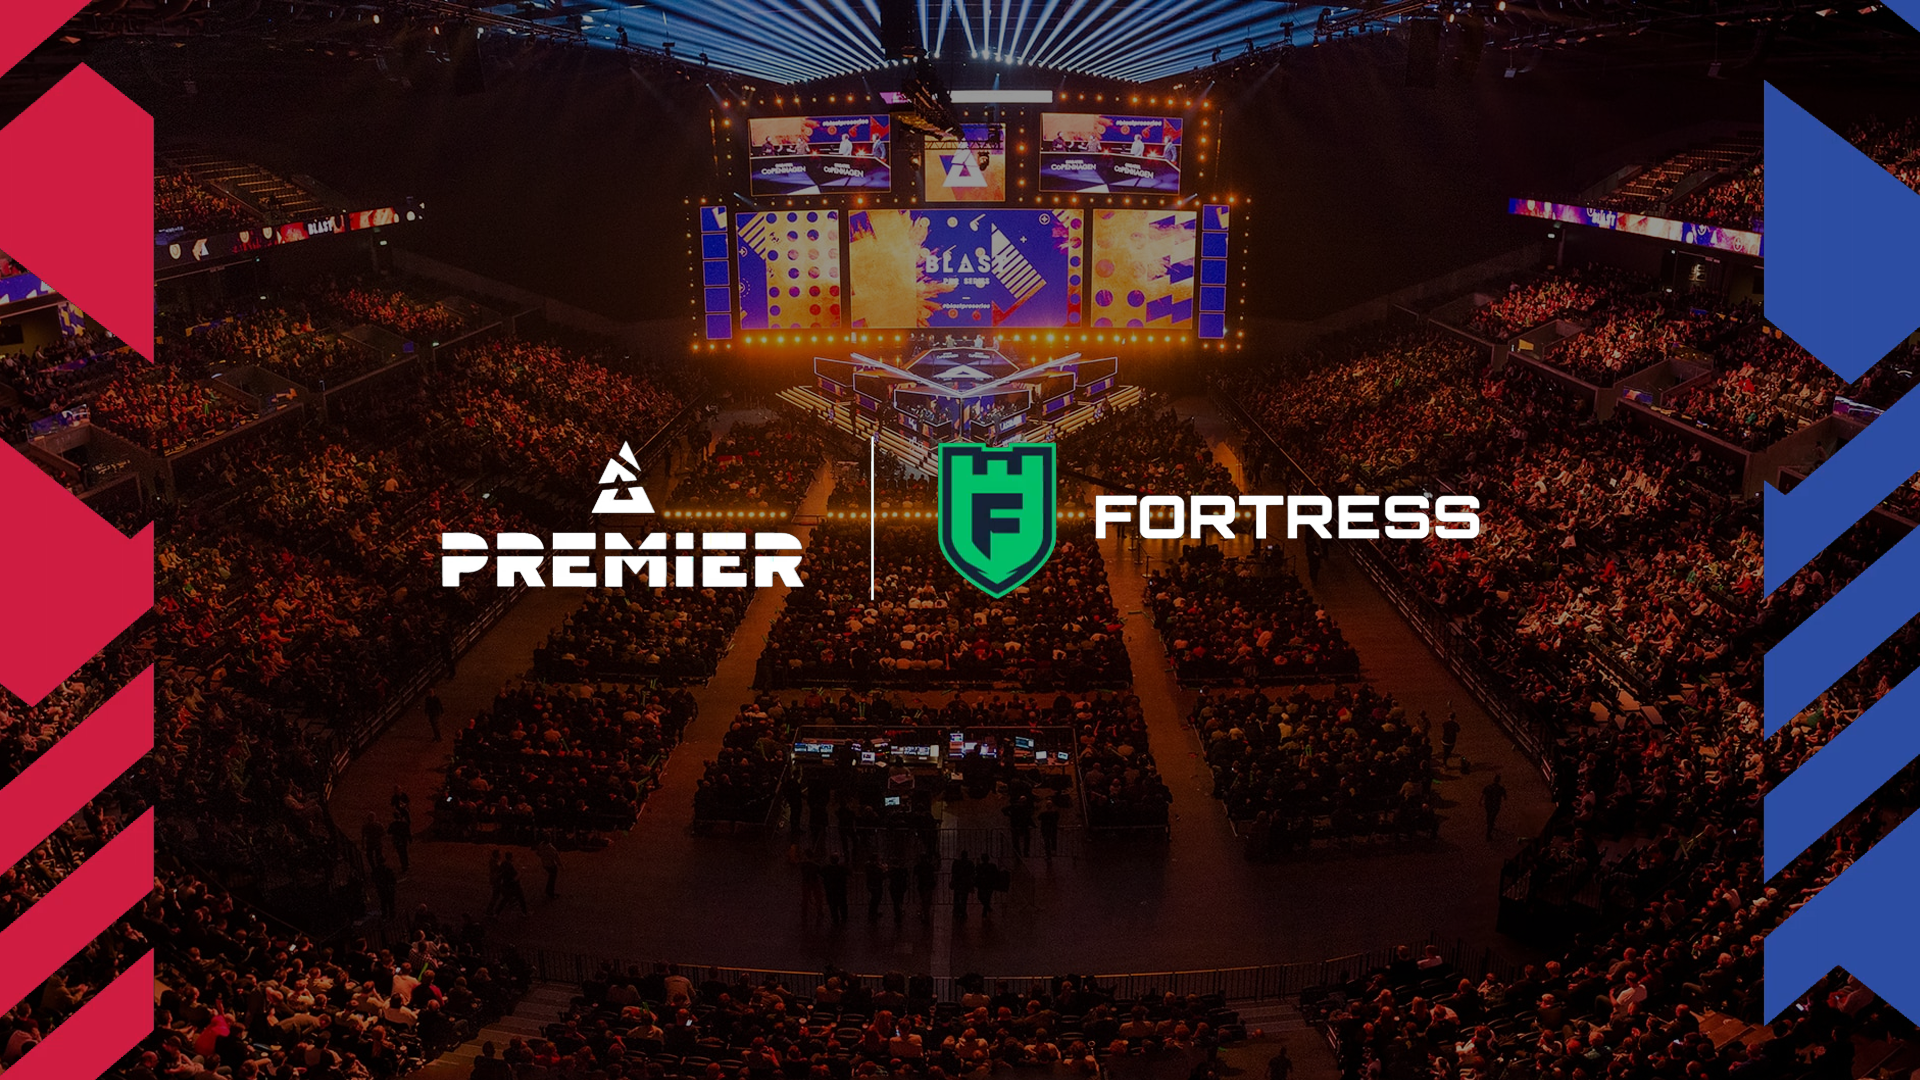 Fortress partners with BLAST to bring CSGO Fall Showdown qualifier down under in 2022